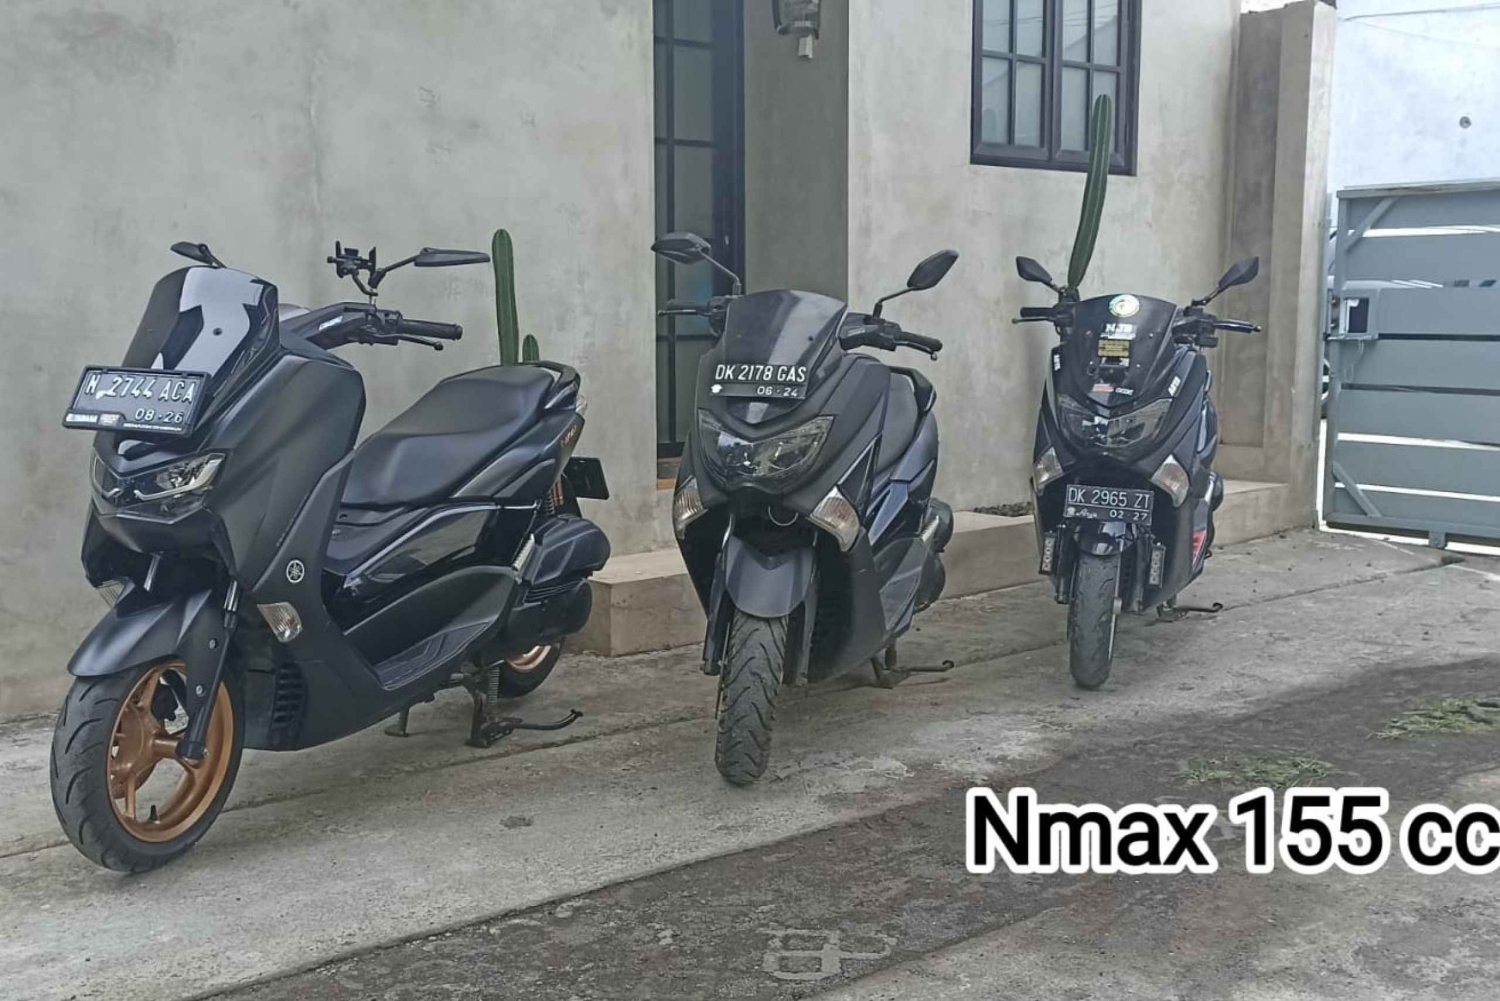 Bali: 2-7 Day Scooter Rental Xmax 250 cc/ Nmax 150cc/ Scoopy